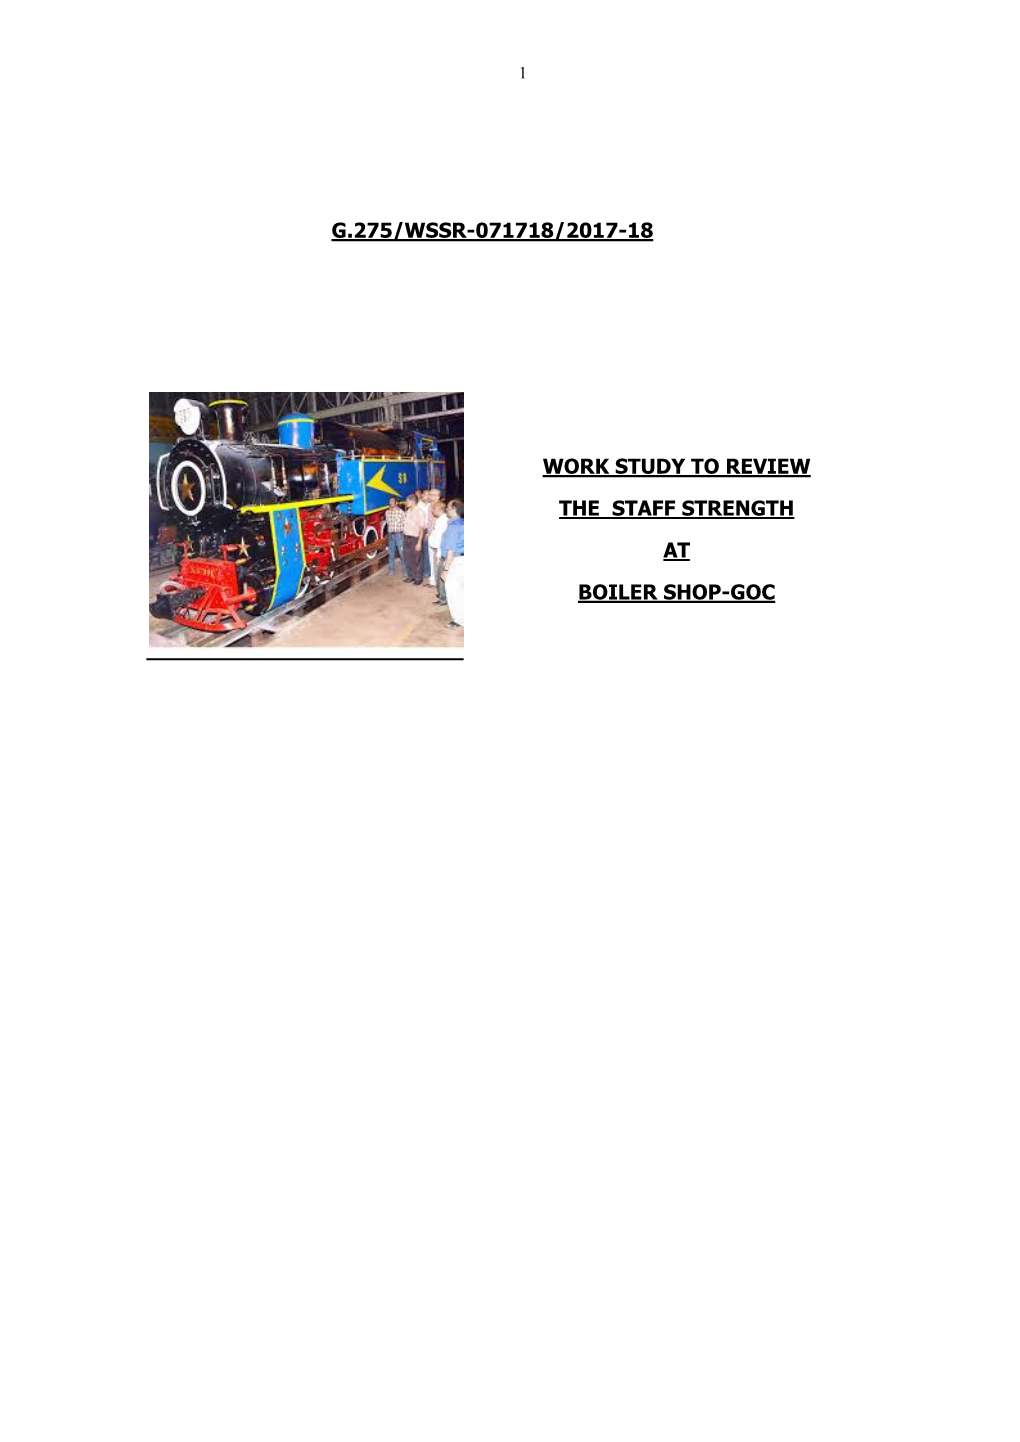 G.275/Wssr-071718/2017-18 Work Study to Review the Staff Strength at Boiler Shop-Goc